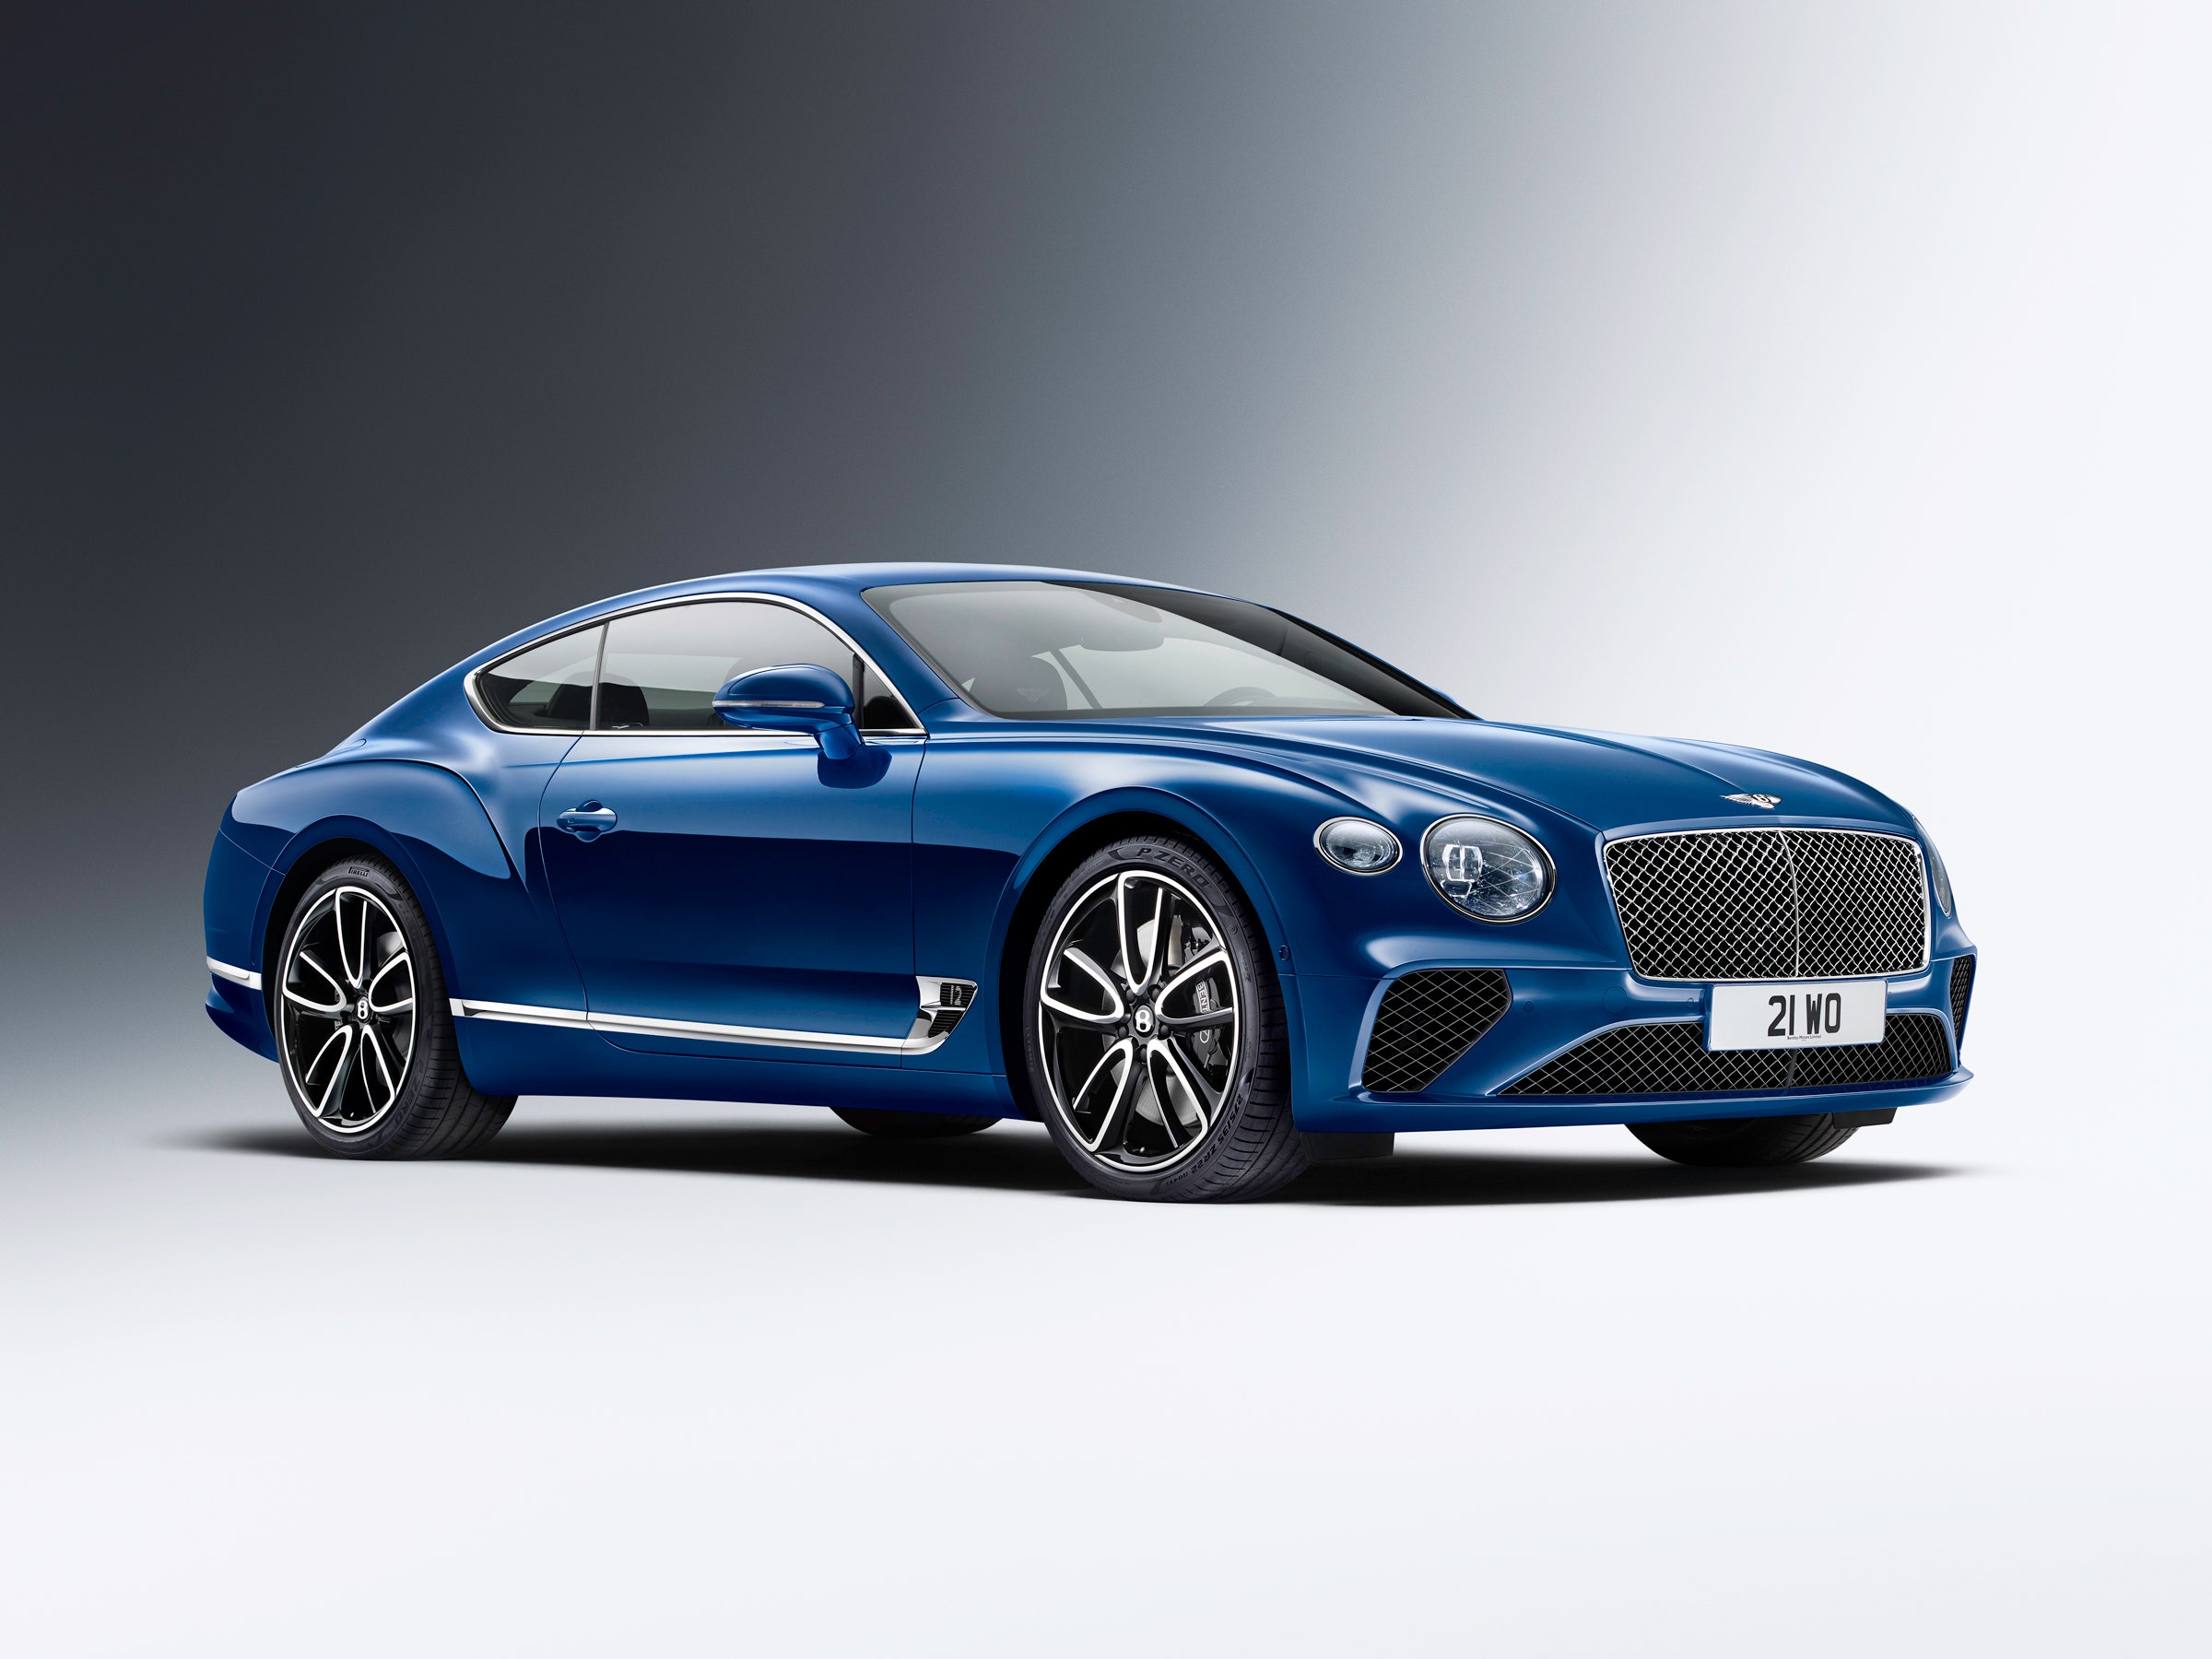 Bentley's New Continental GT Combines Luxury Tech With Classic Looks | WIRED